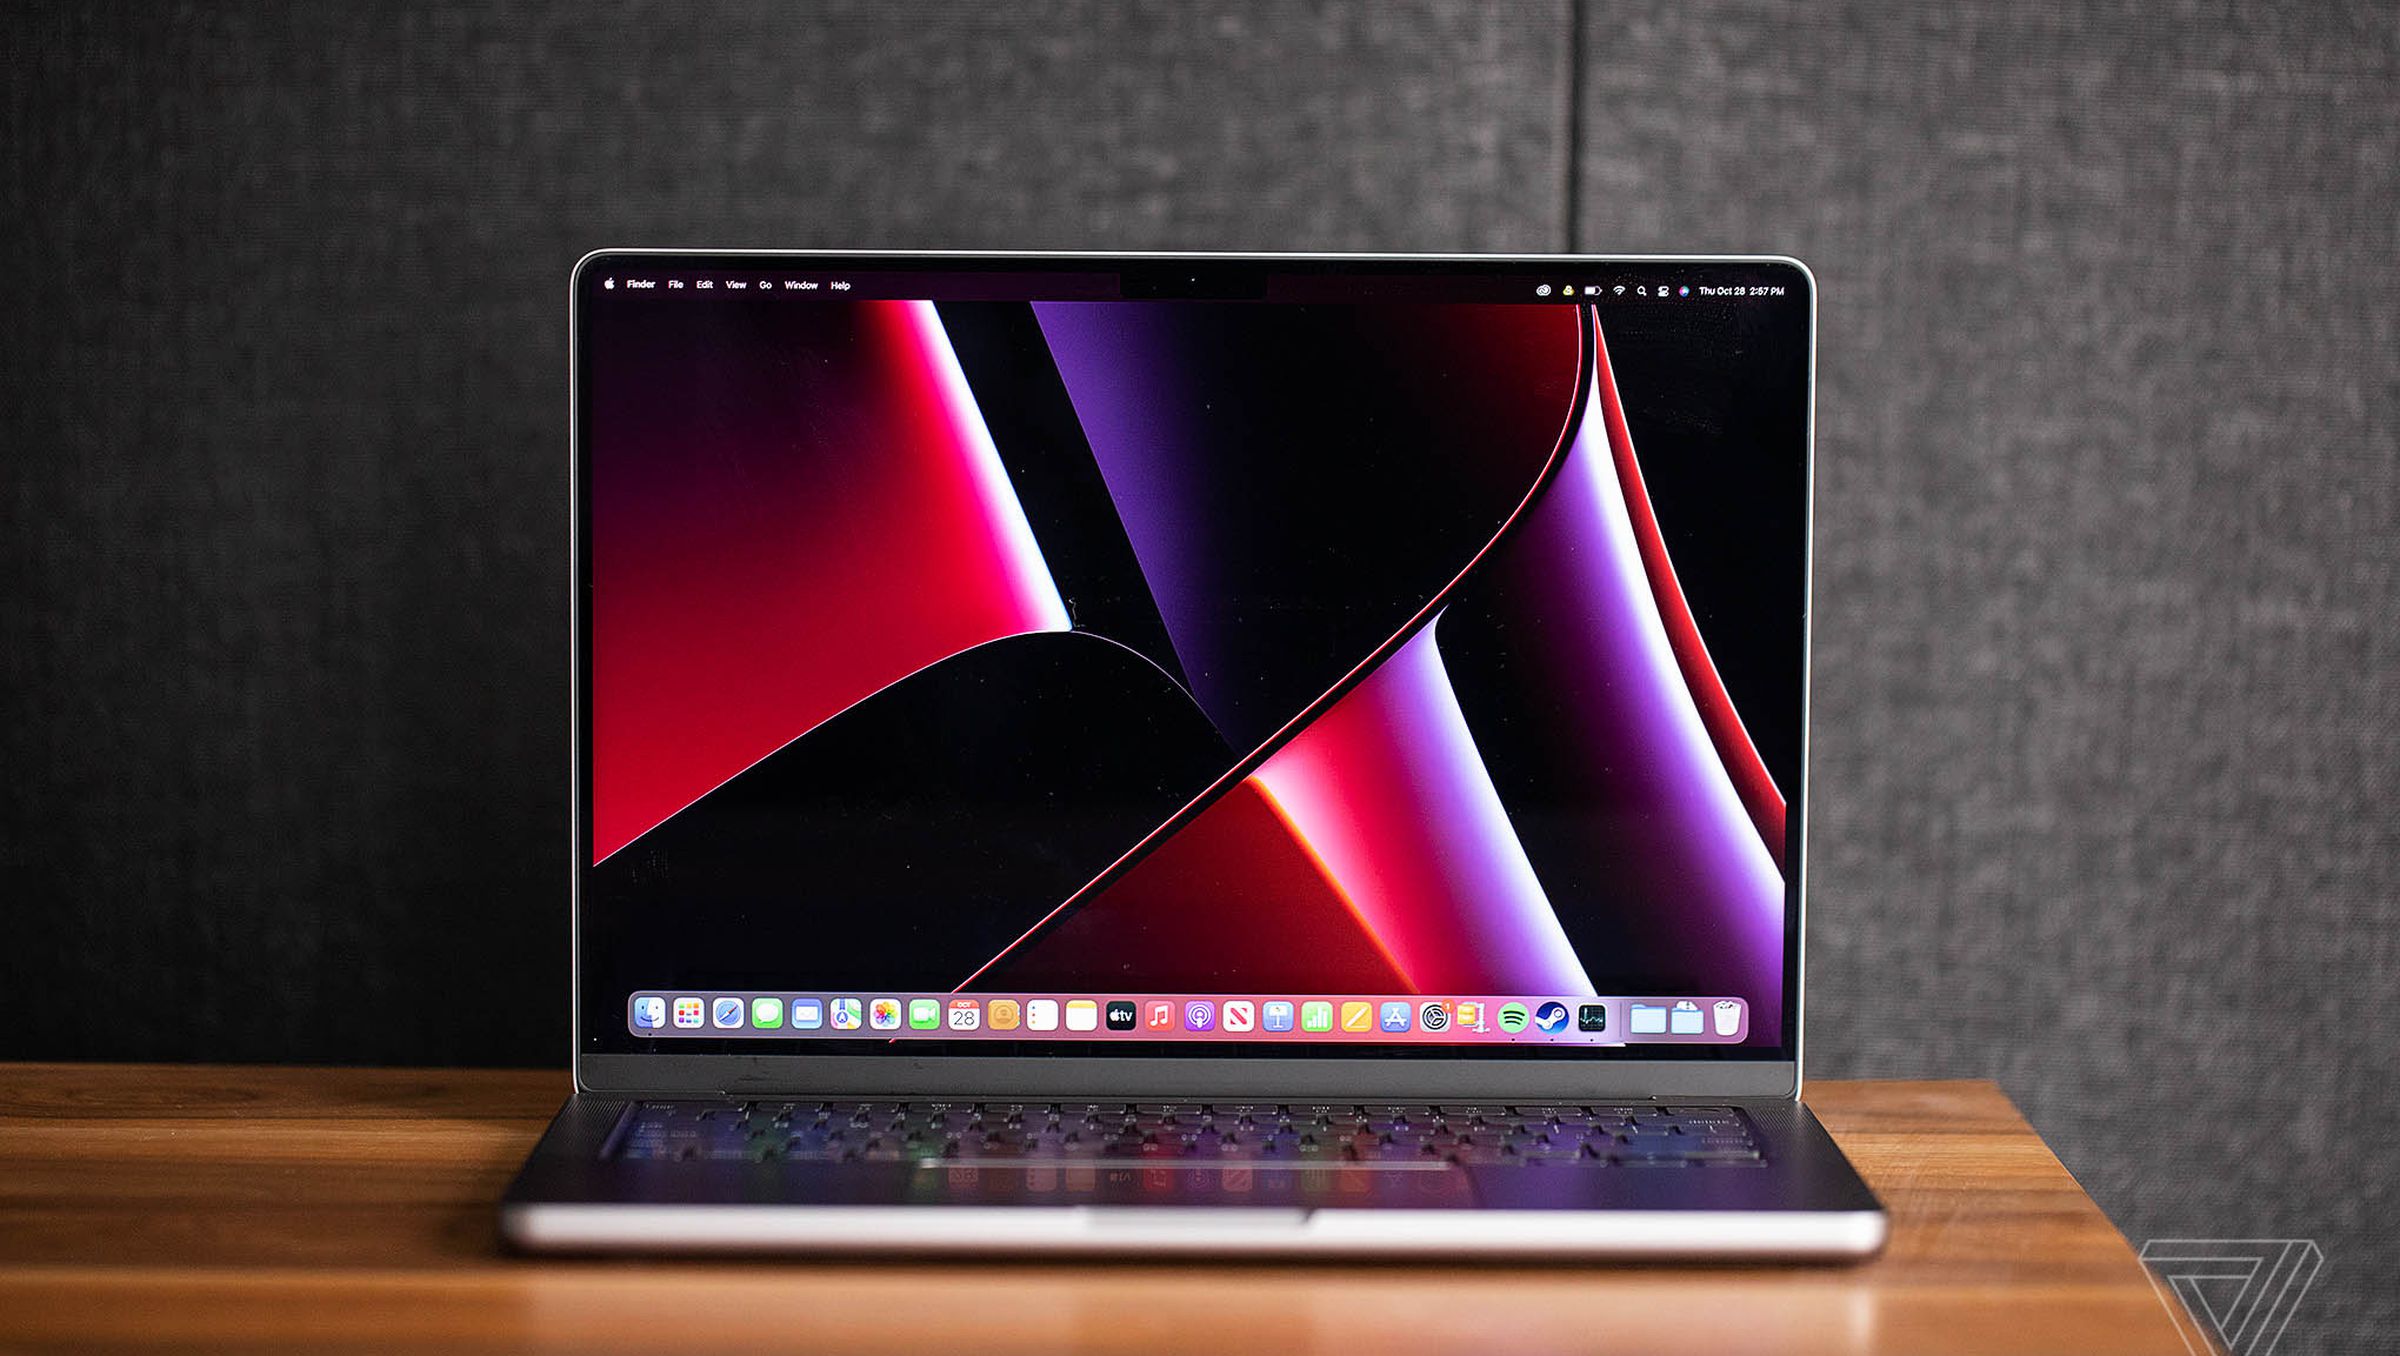 Apple’s 2021 14-inch MacBook Pro sitting turned on and open with its screen facing the camera on a desk.